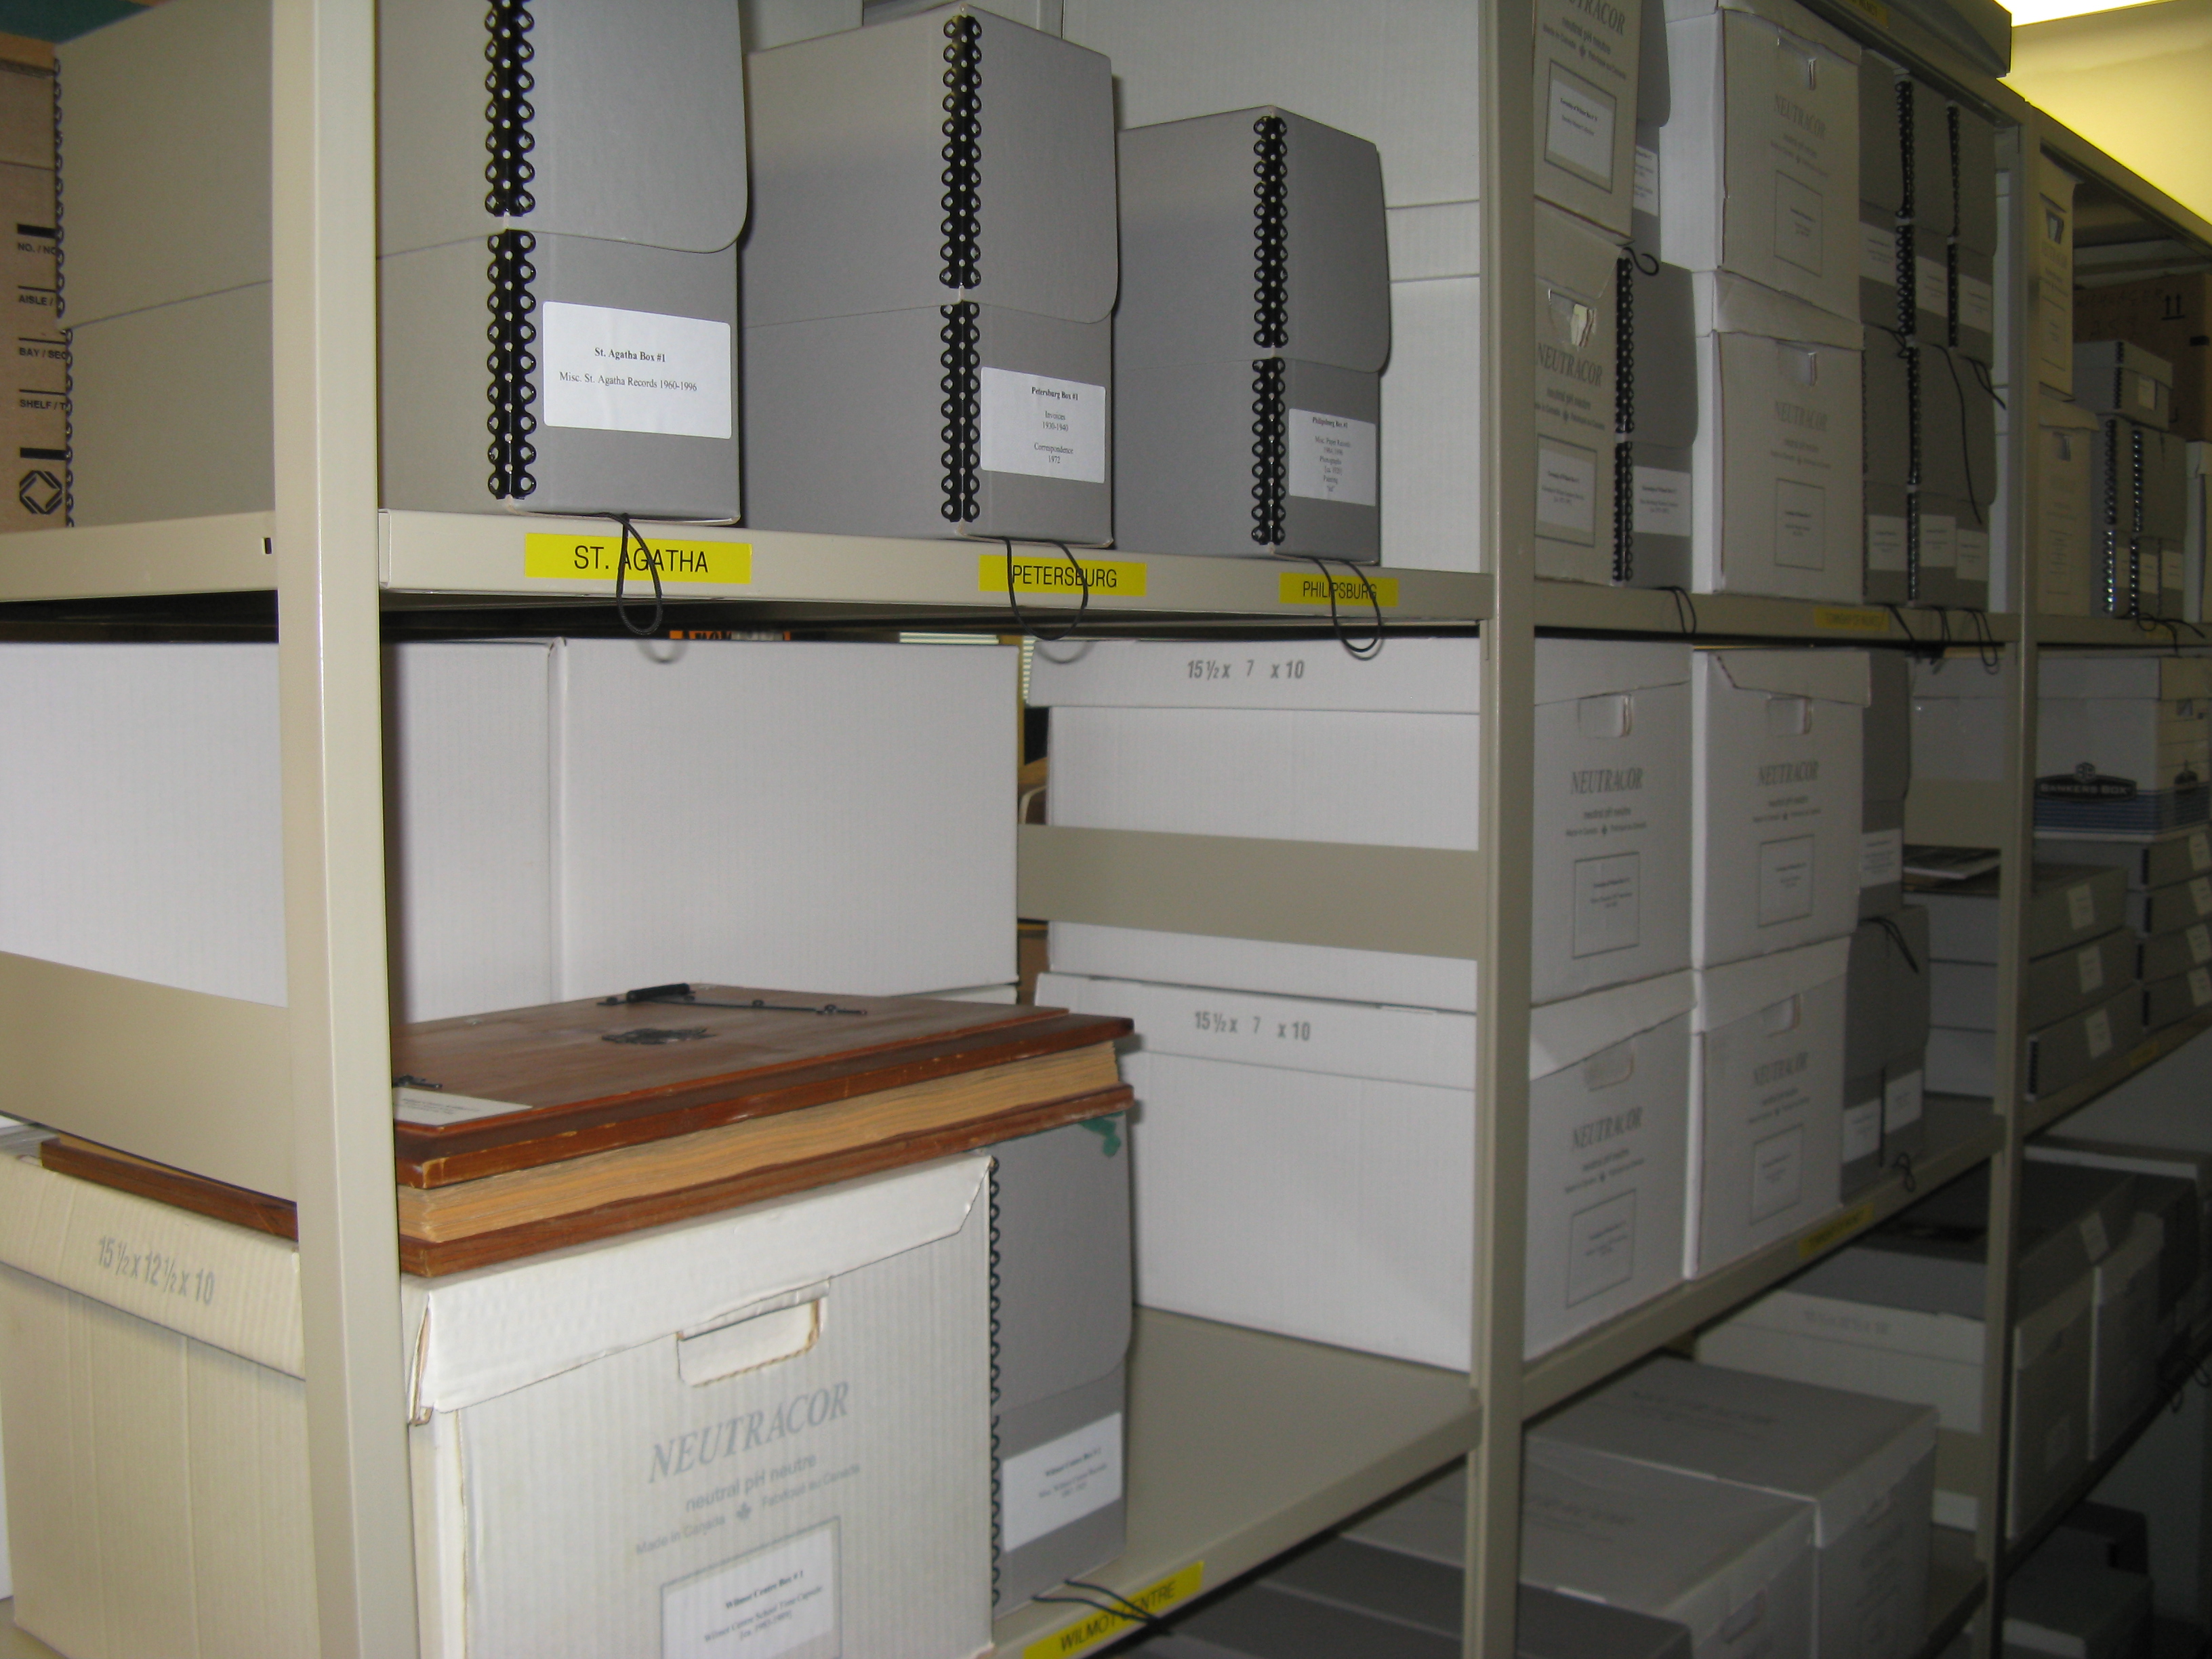 Archival material in storage